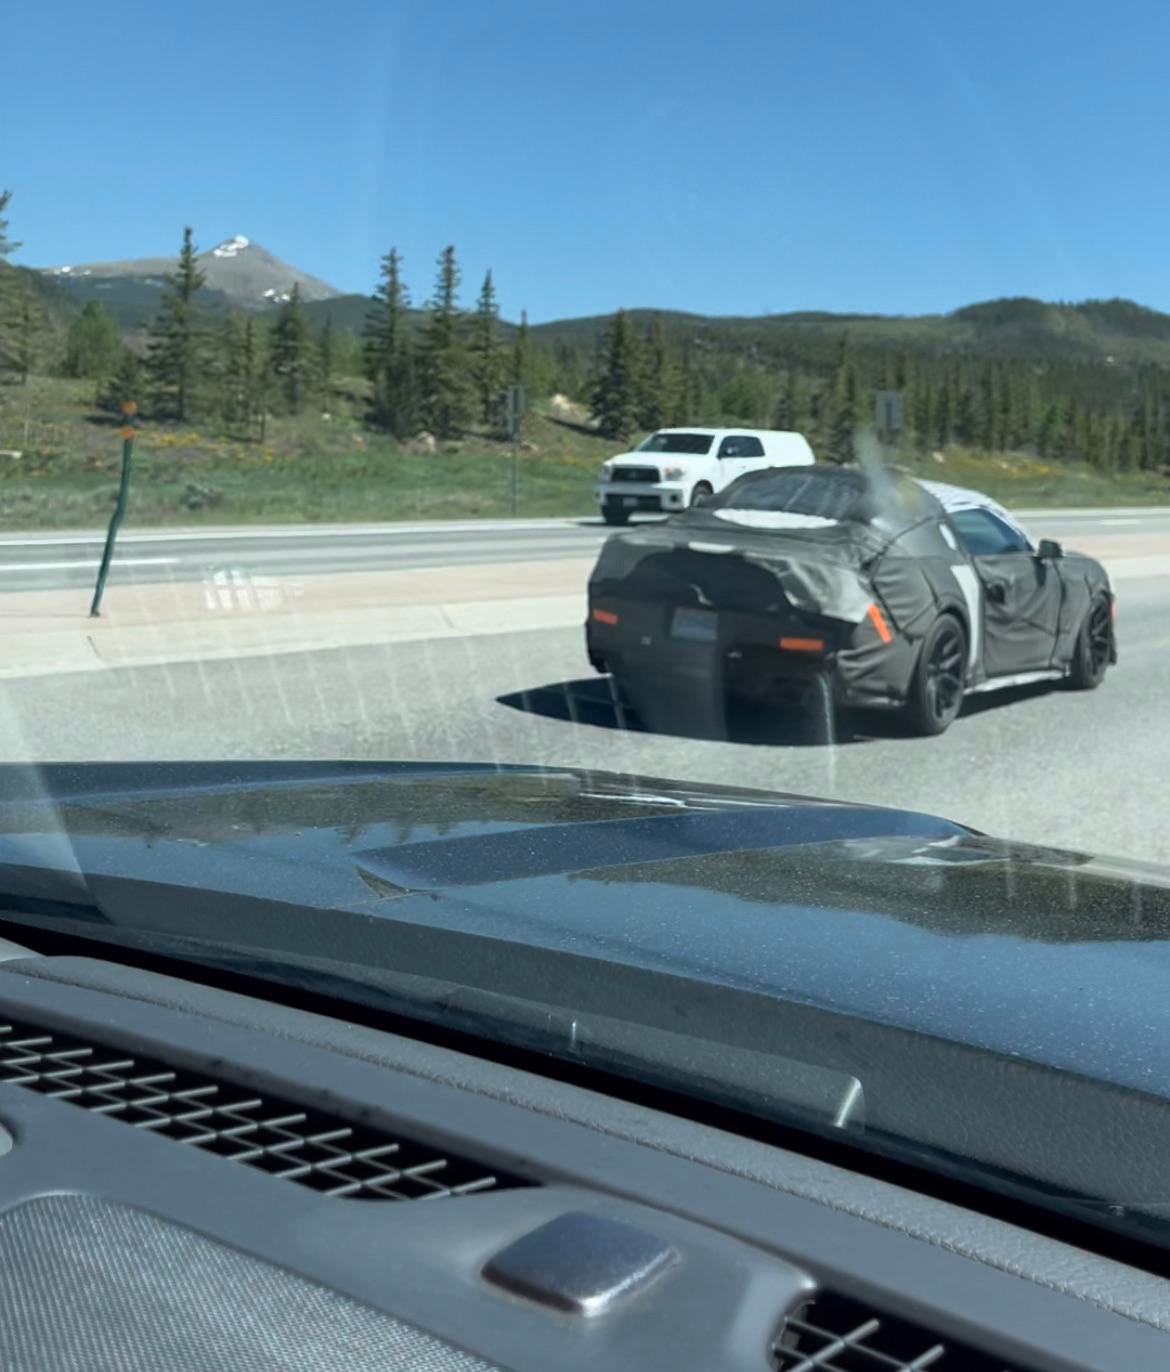 S650 Mustang New S650 Mustang test prototype shots from Frisco Colorado sighting (June 15, 2022) - Updated With Video ruqdzcuesu591